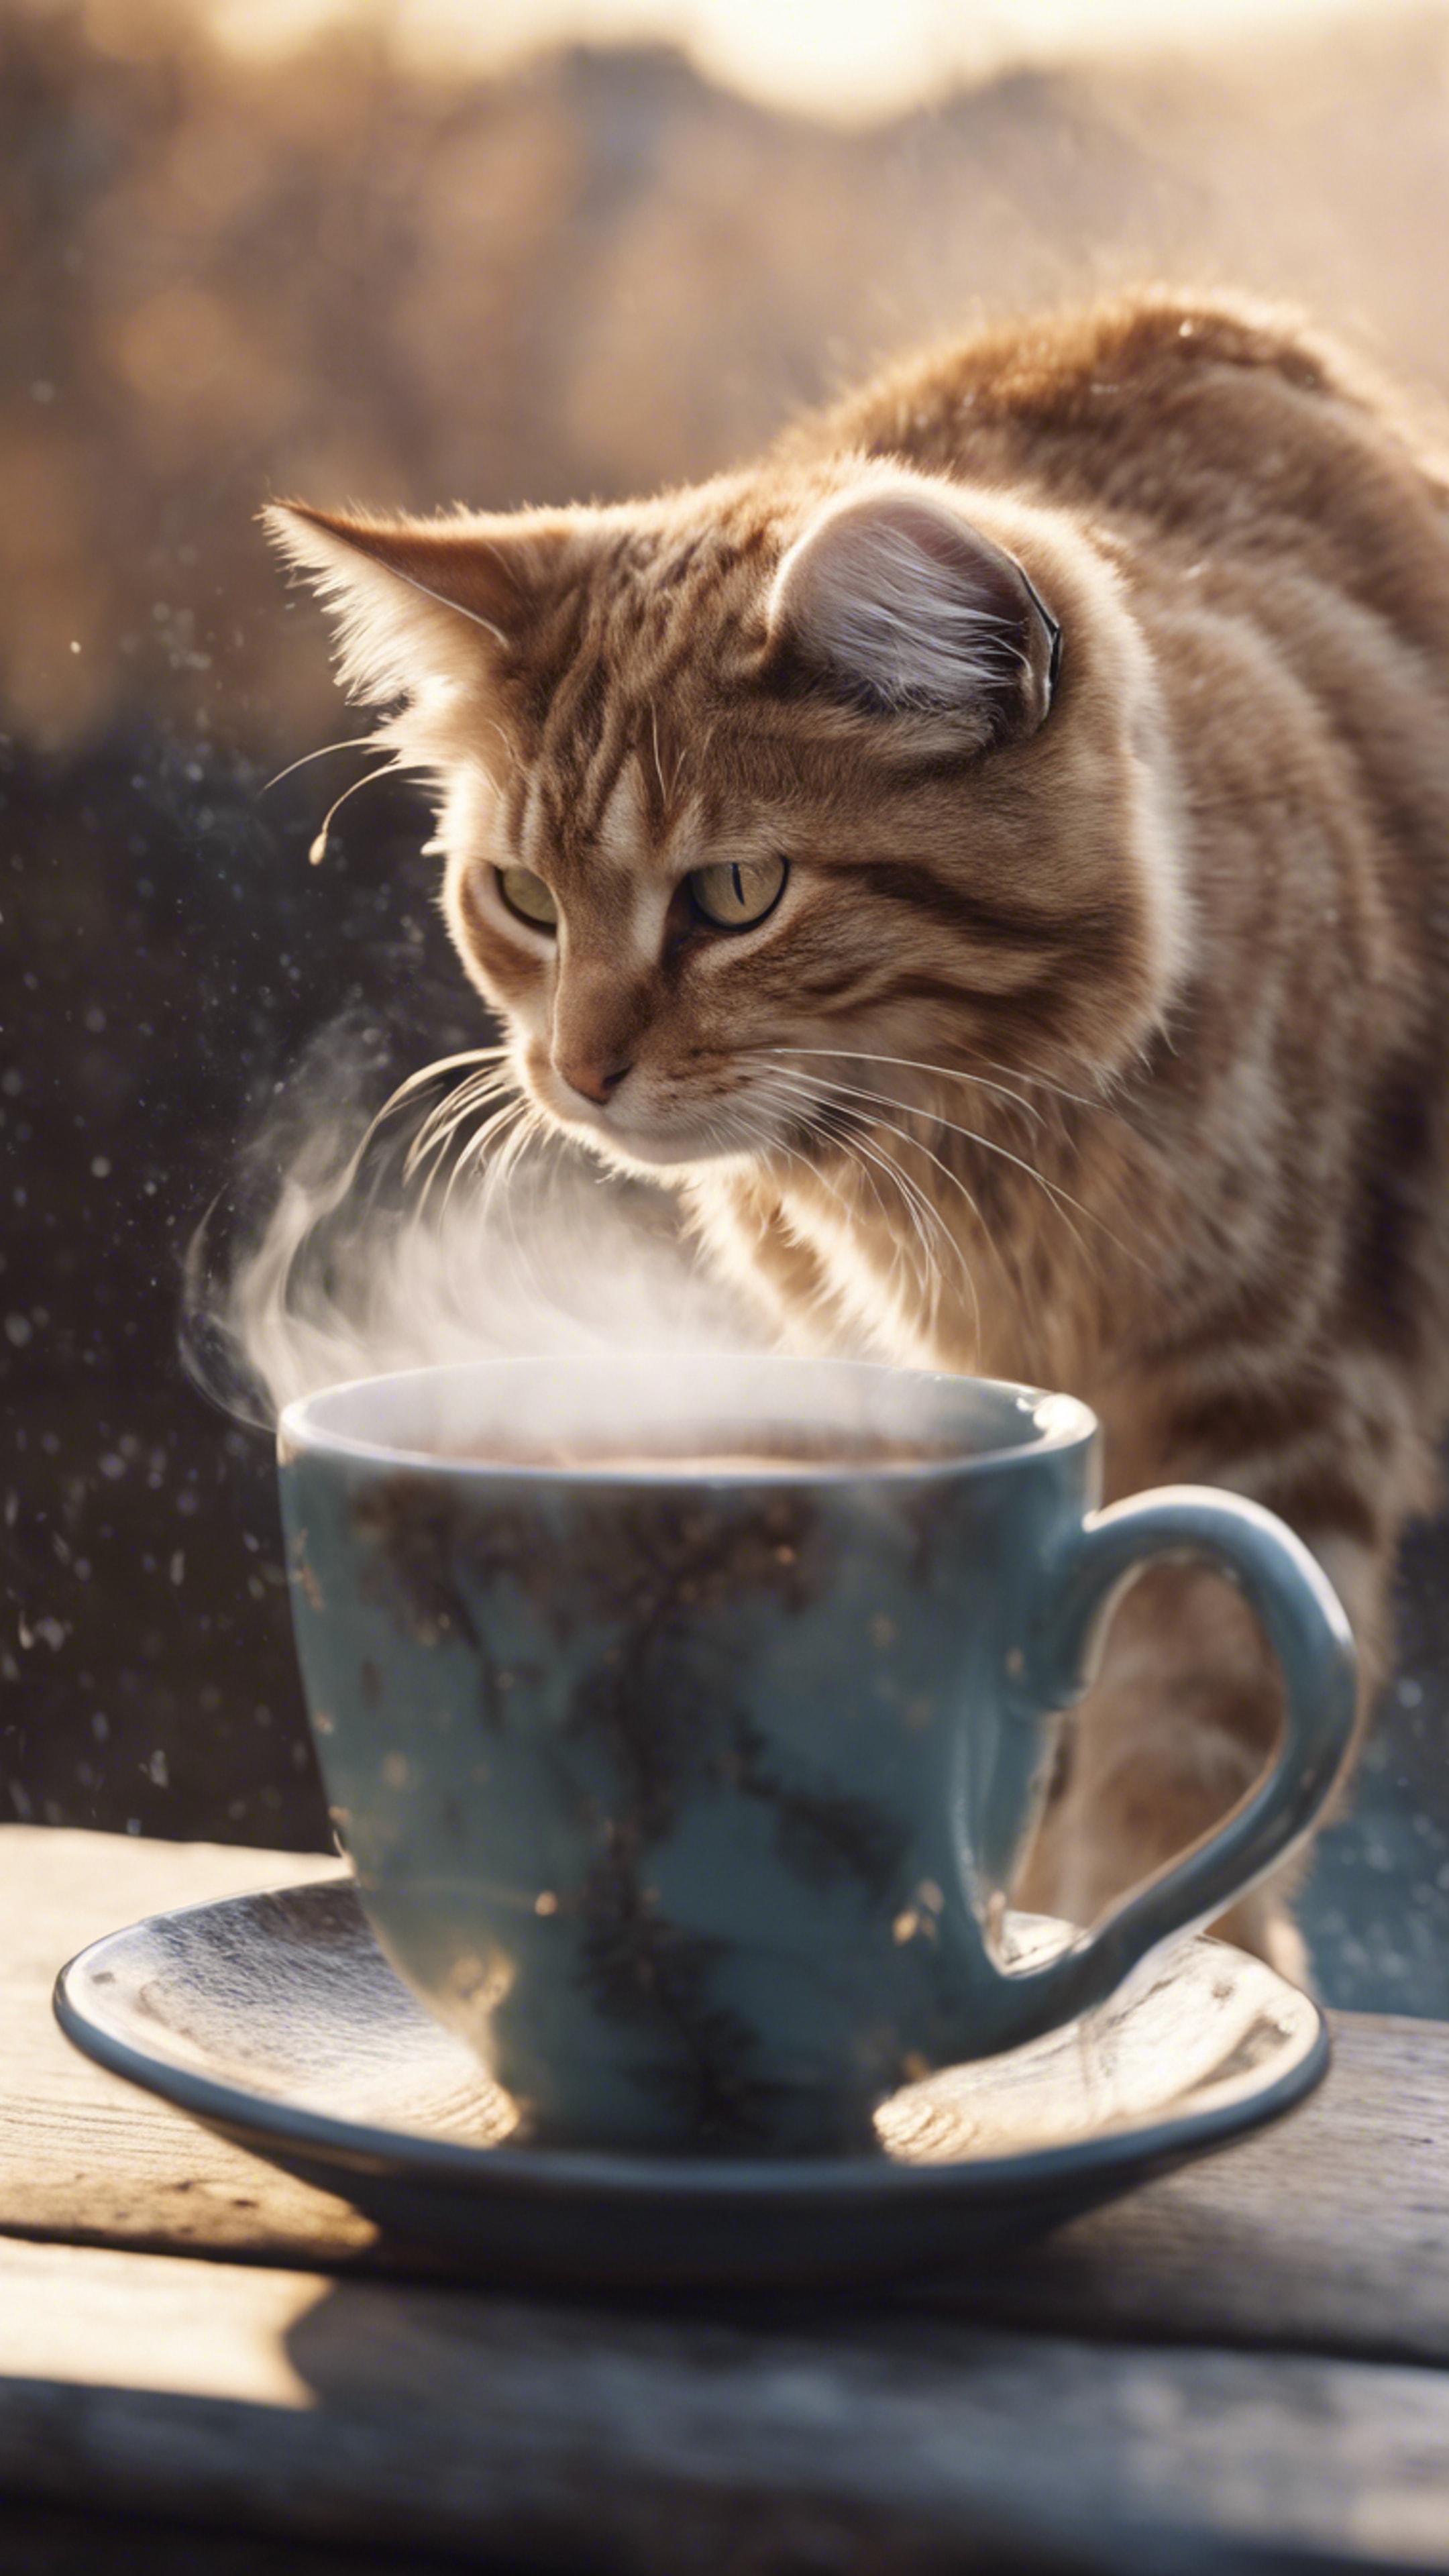 A lukewarm cup of coffee, with a steam motif of a cat hissing against a chilly winter morning. Валлпапер[d53de69744a34ba58639]